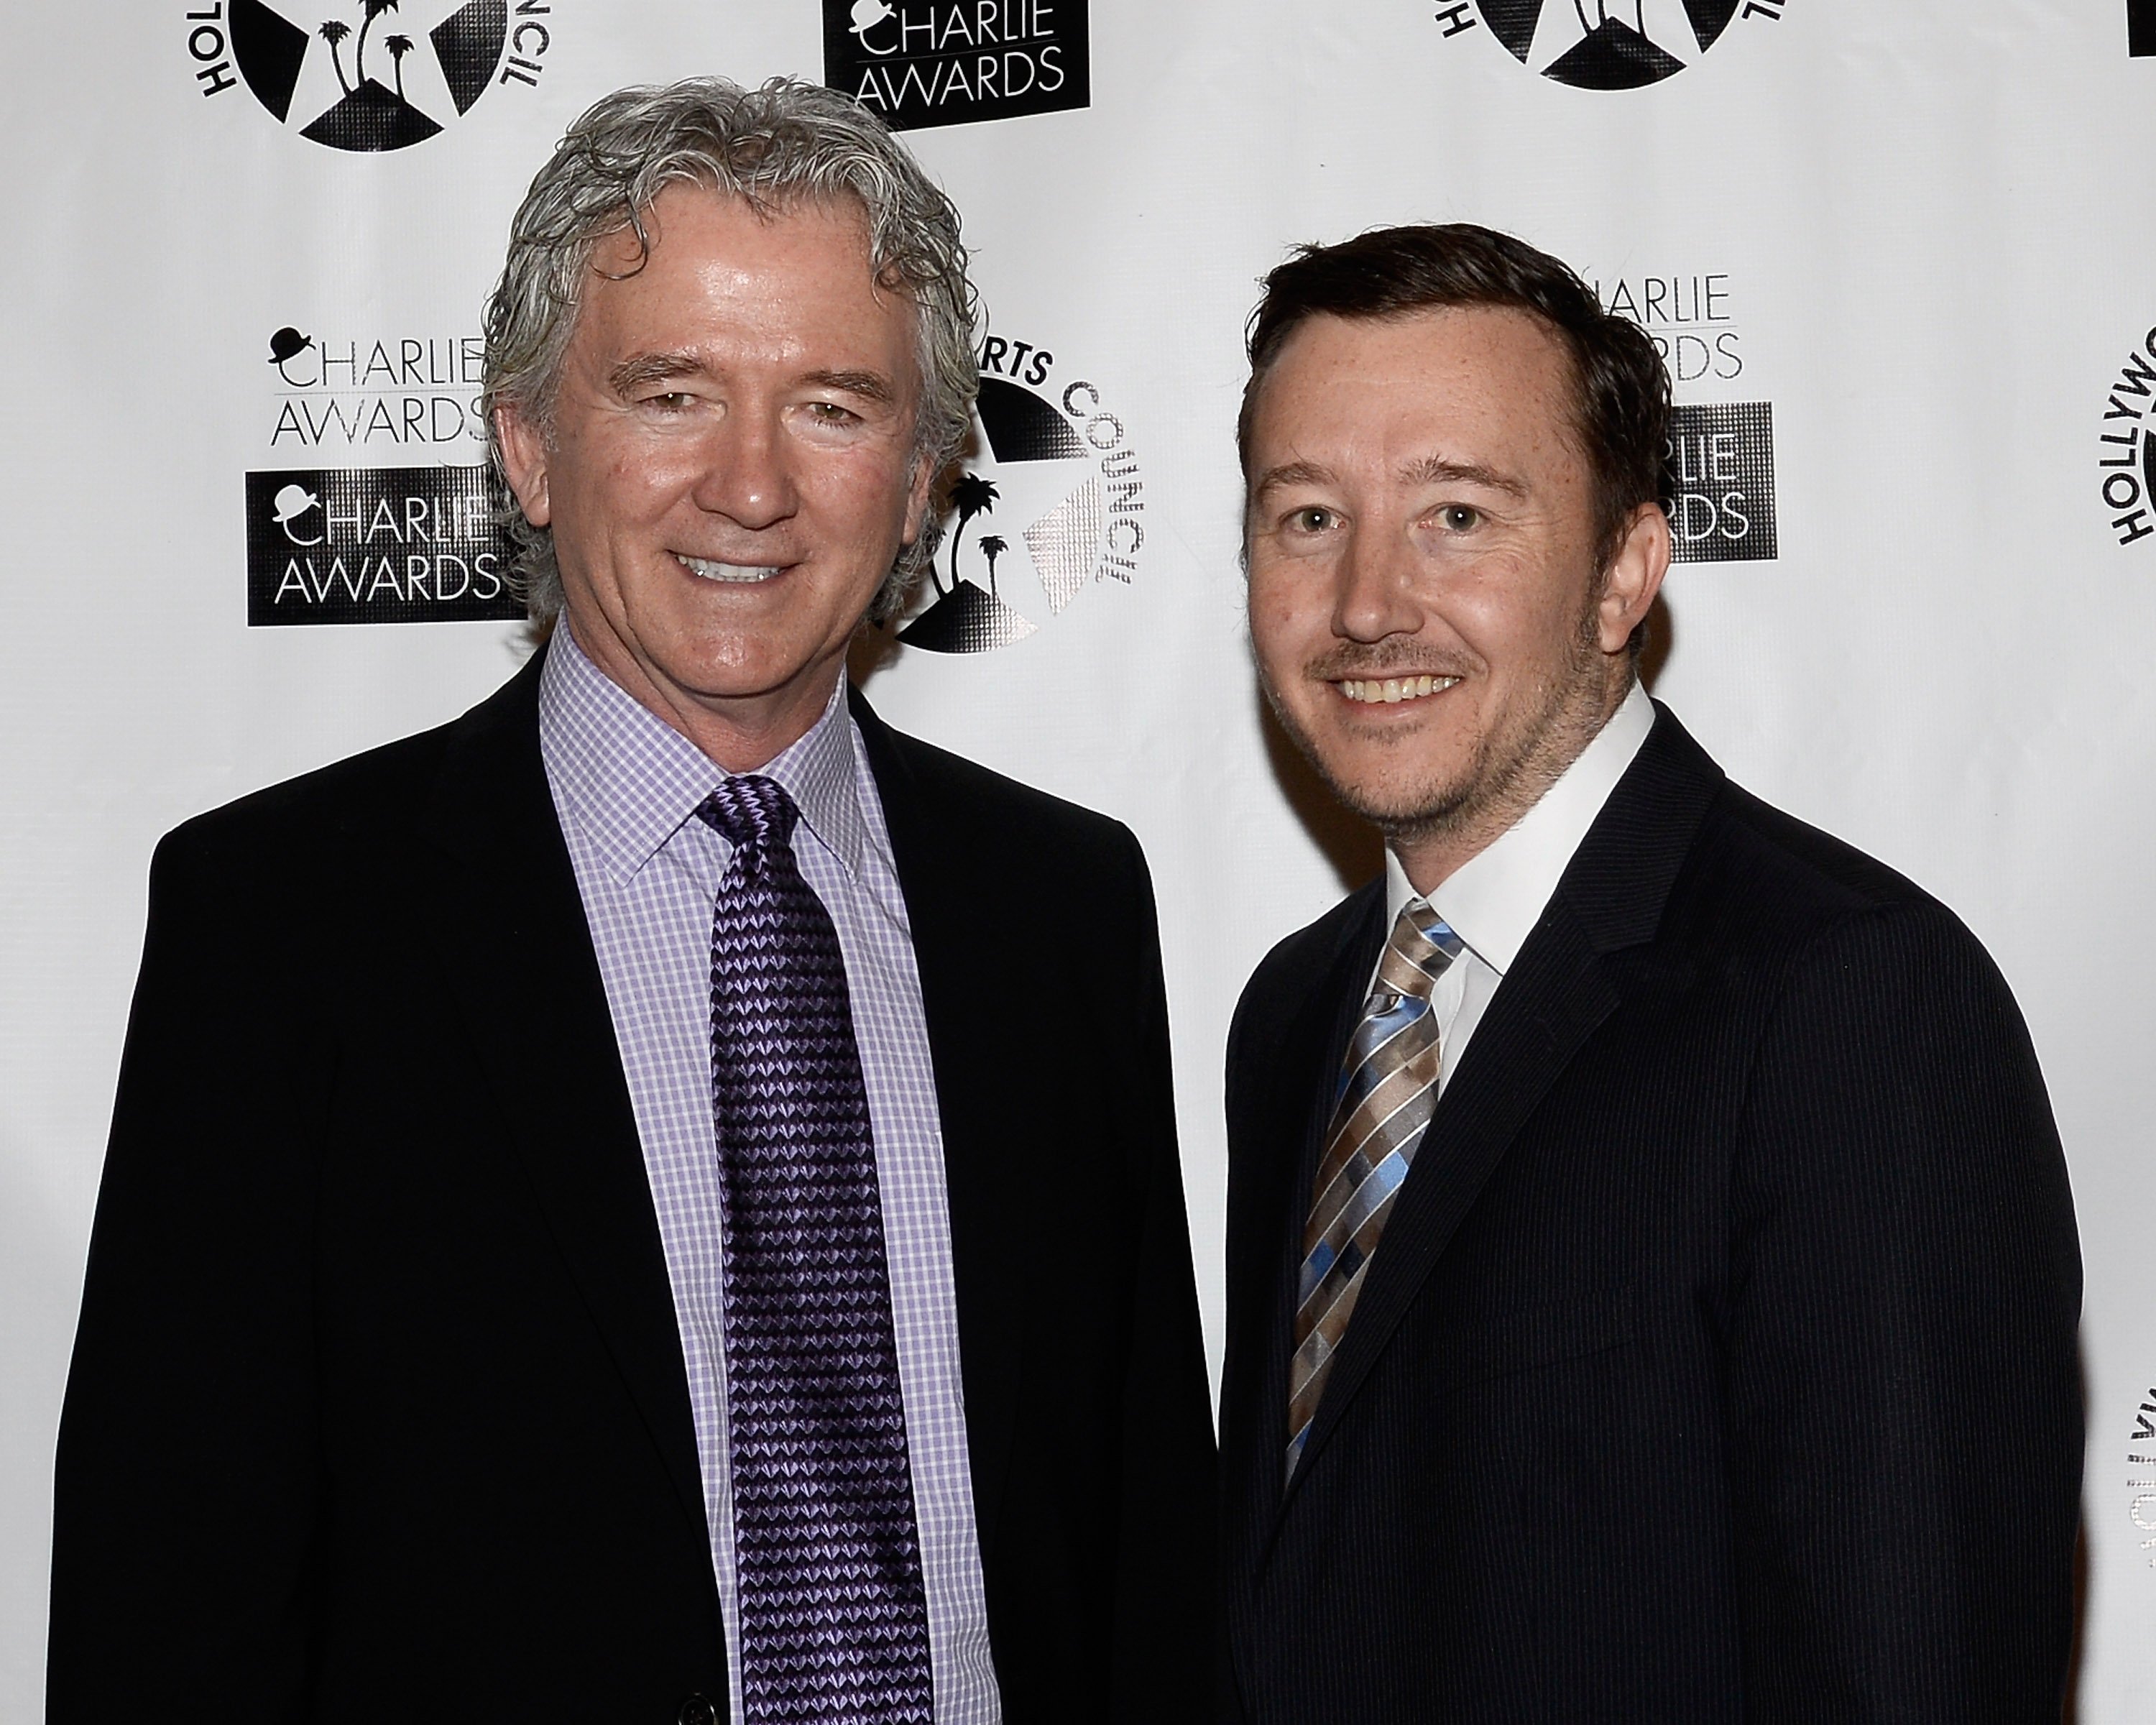 Patrick Duffy and Padraic Duffy pose during their attendance at the Hollywood Arts Council's 29th Annual Charlie Awards Luncheon at the Hollywood Roosevelt Hotel on May 1, 2015, in Hollywood, California.  |  Source: Getty Images